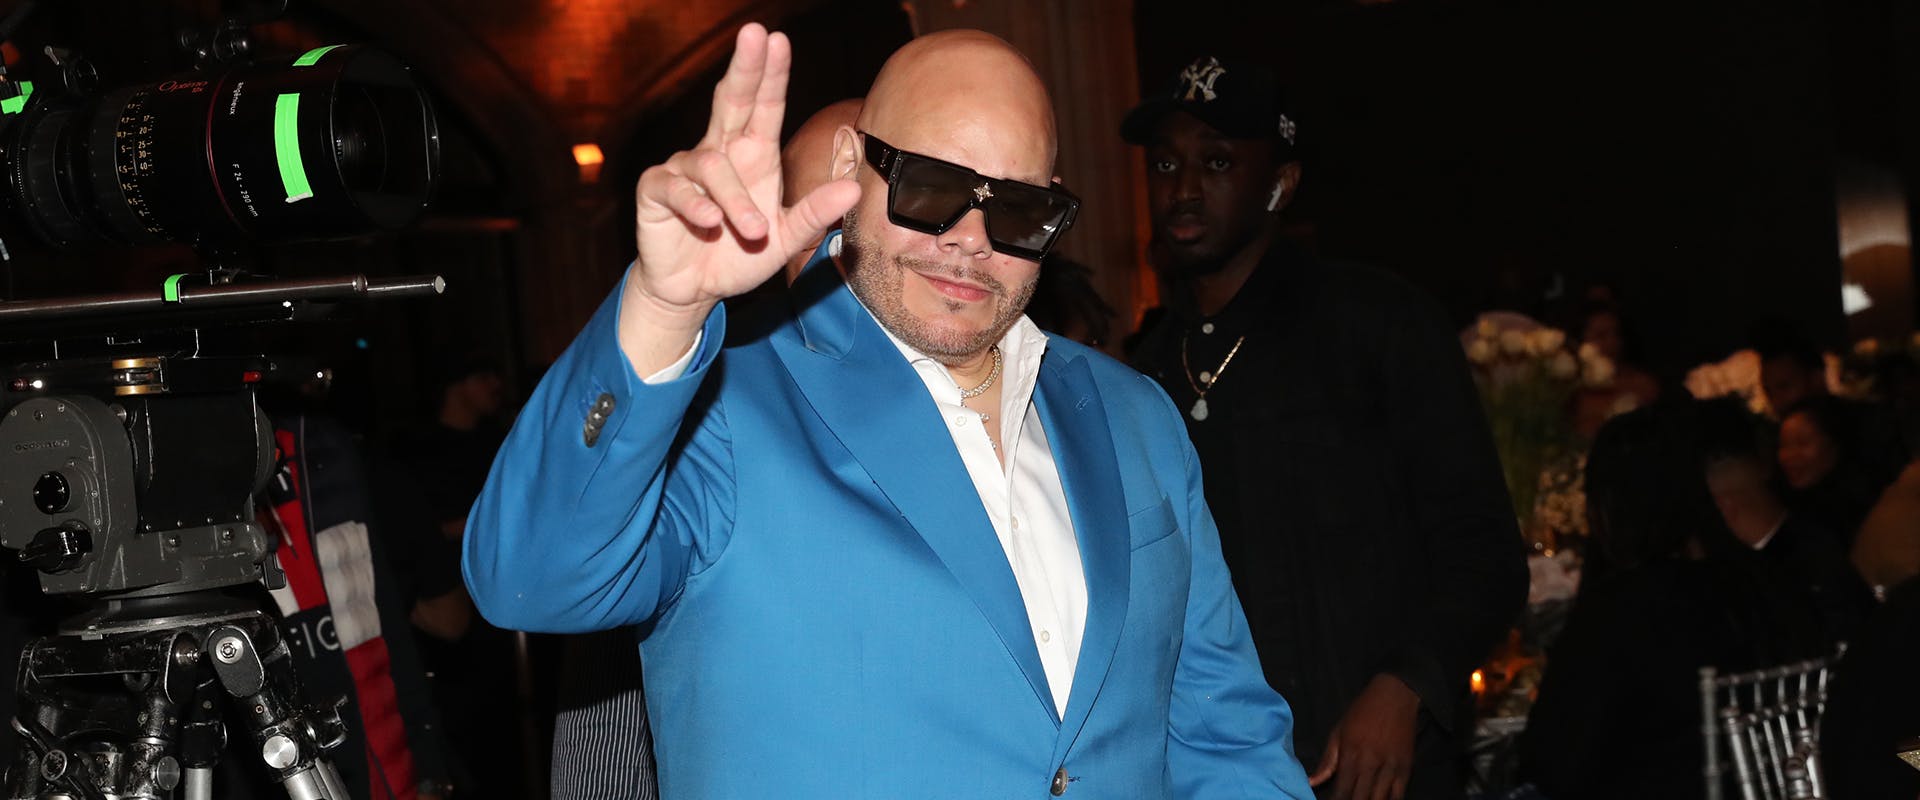 Fat Joe attends the CJ Wallace & Lexus Celebrate Hip-Hop and Honor the Life of Christopher Wallace (a.k.a The Notorious B.I.G) at the Lil' Kim Tribute Gala at Gustavino's on May 20, 2022 in New York City. (Photo by Johnny Nunez/Getty Images for Lexus)